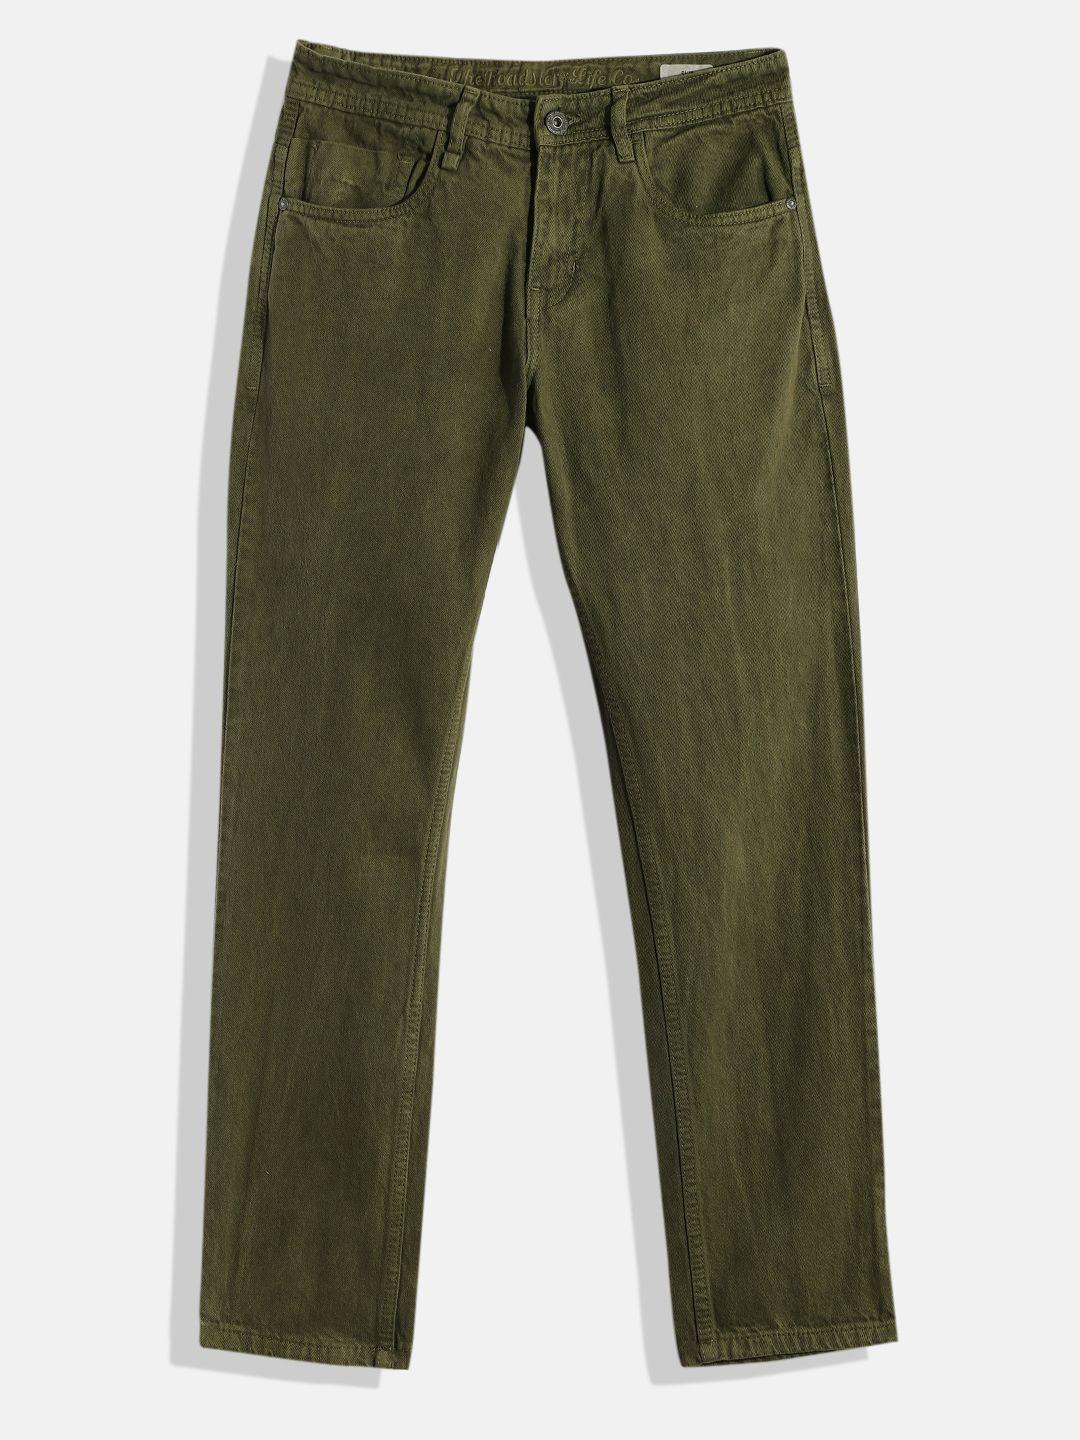 uth by roadster boys olive green slim fit stretchable jeans